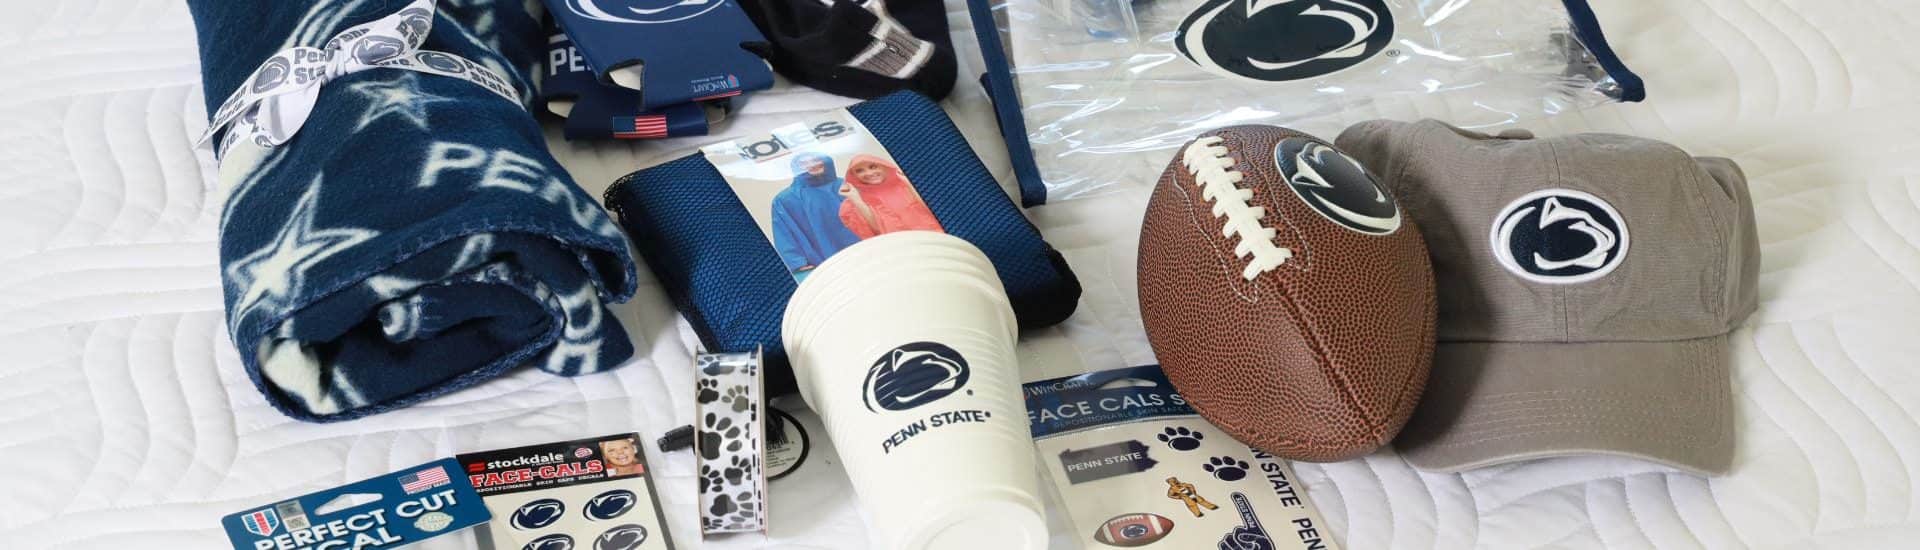 Penn State branded hat, football, cup, stickers, blanket, clear bag, and cozies on a white blanket